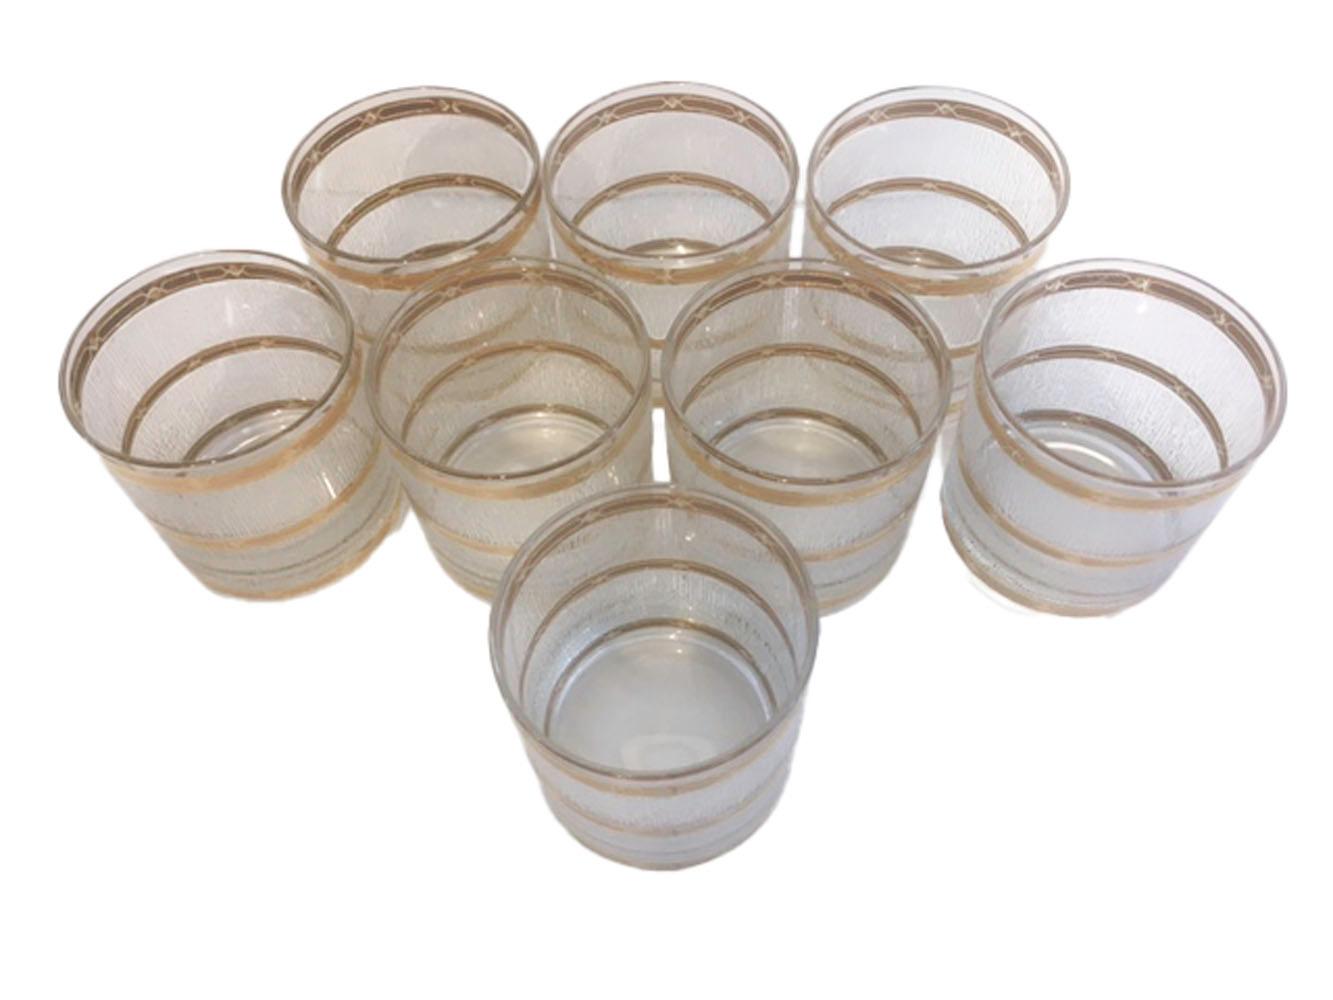 Mid-Century Modern Culver Barware - vintage rocks / lowball glasses with translucent textured icicle surface divided by embossed 22k gold bands, top, bottom and center.